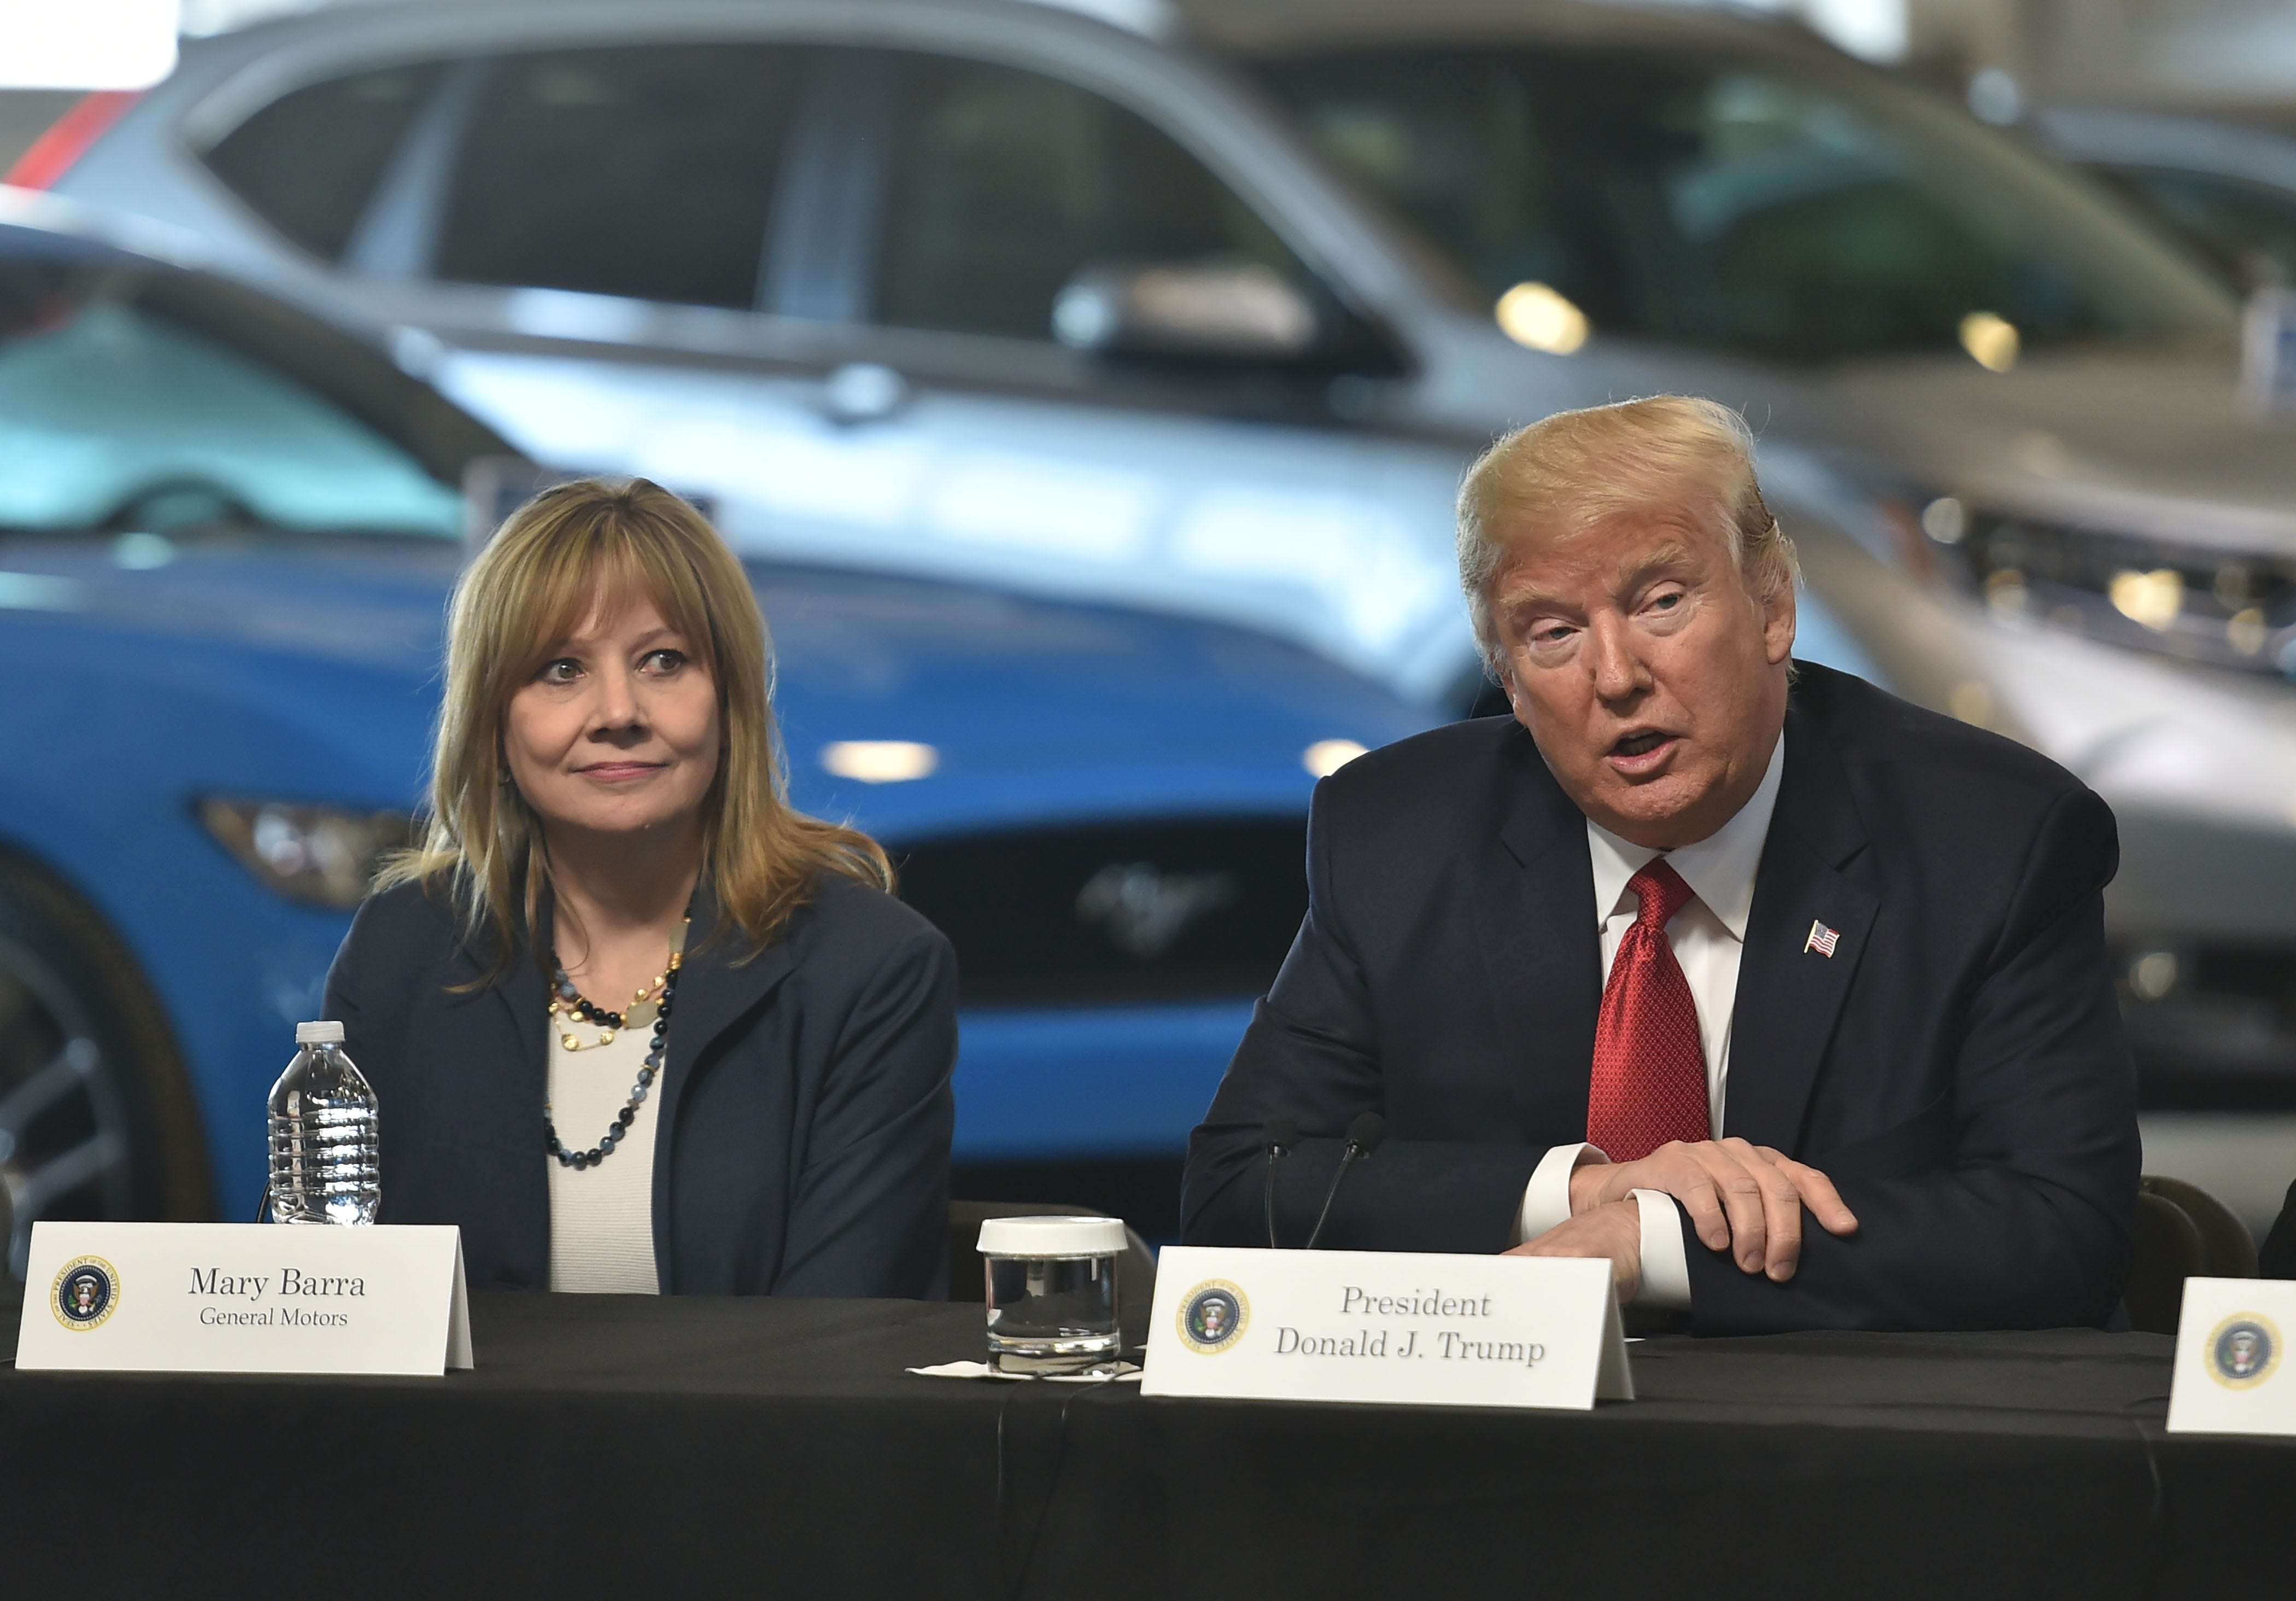 General Motors Co. CEO Mary Barra, left, is pushing a restructuring that would idle four U.S. plants, angering President Donald Trump.